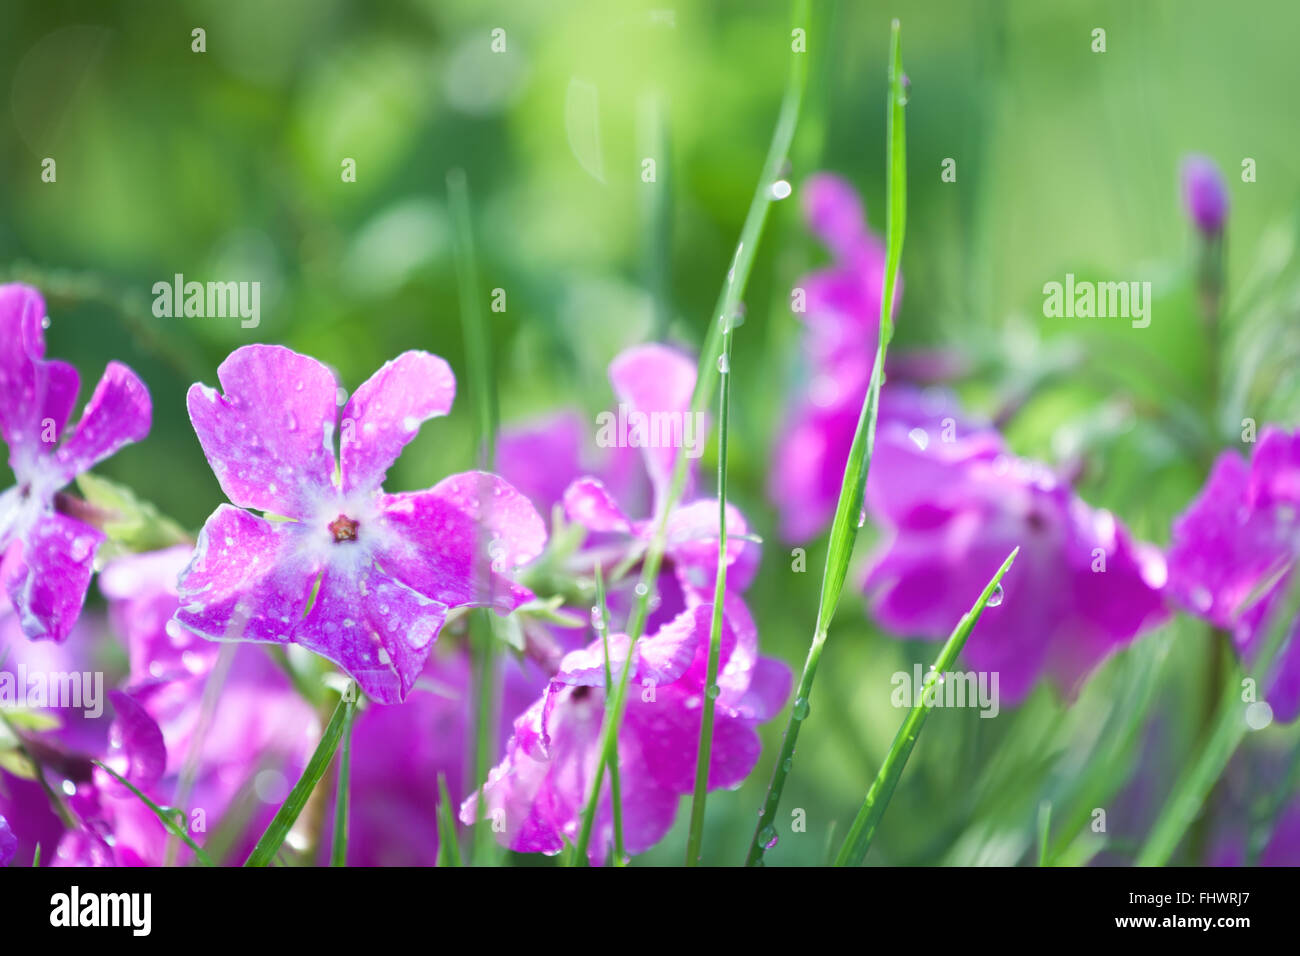 Purple spring flowers on green grass background Stock Photo